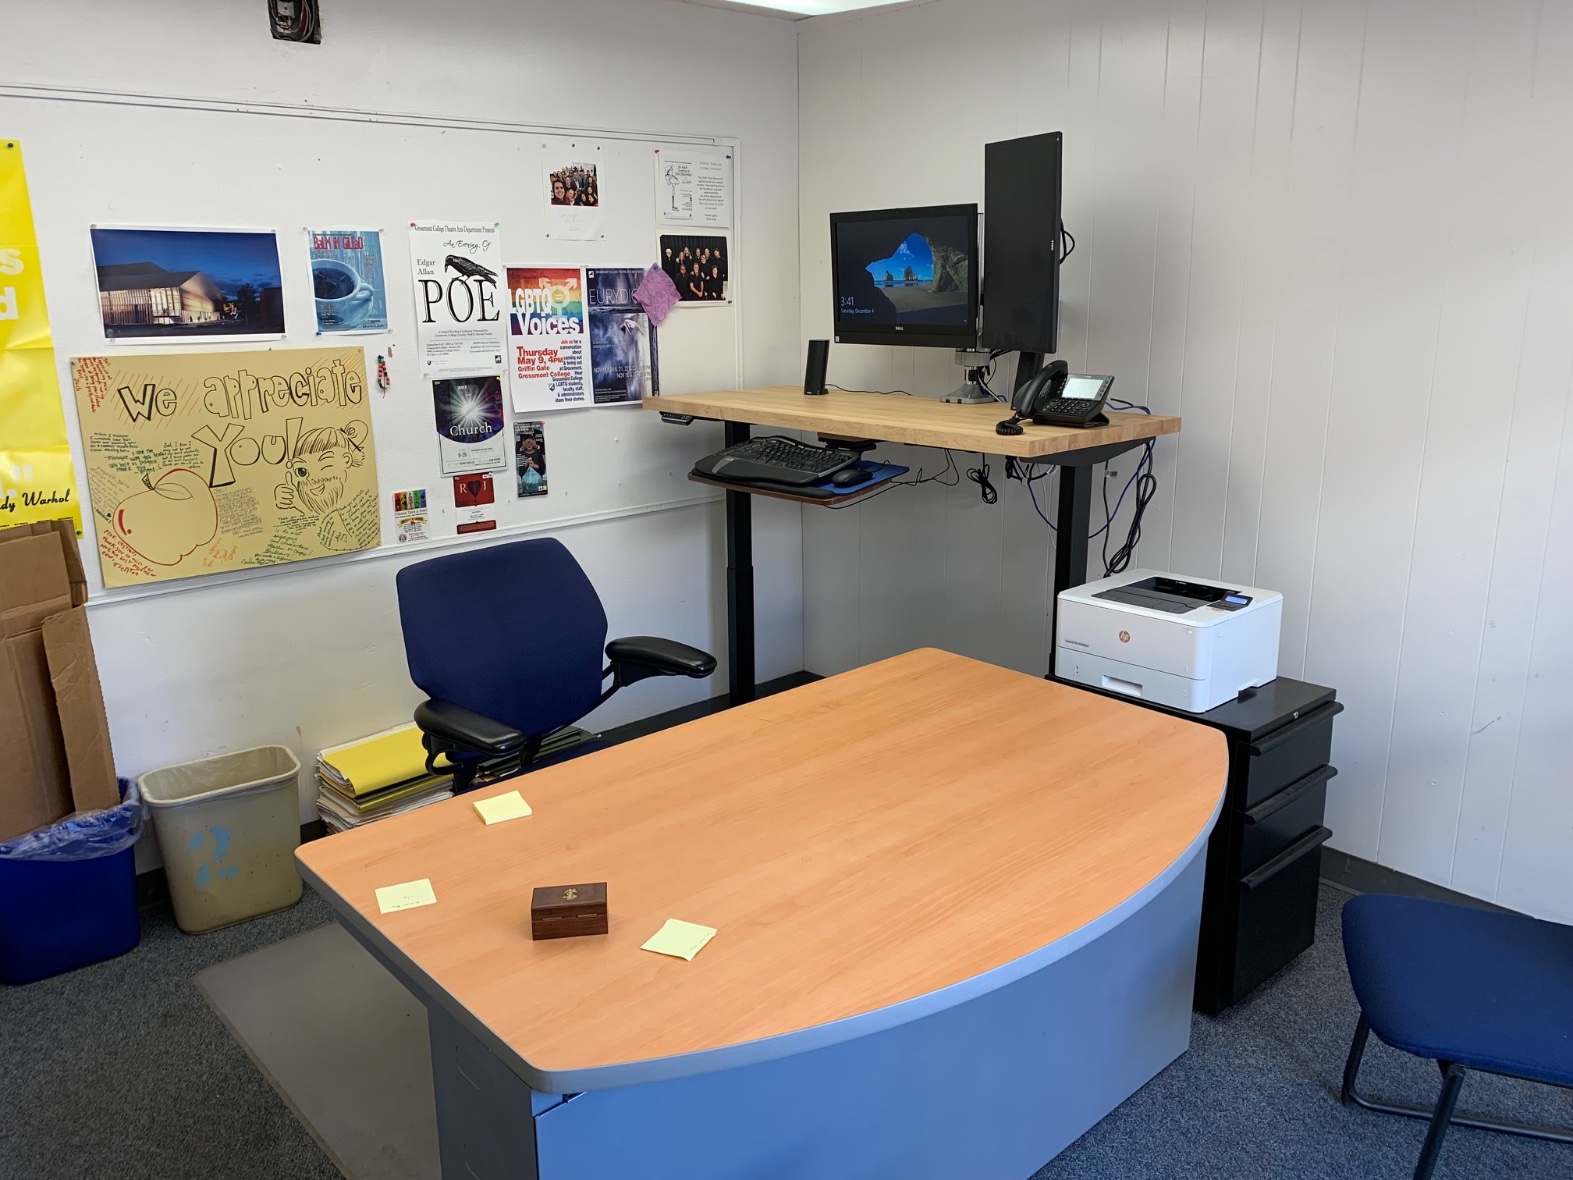 New standing desk is now in place for the Interim Dean (who is looking forward to going back to teaching next semester).